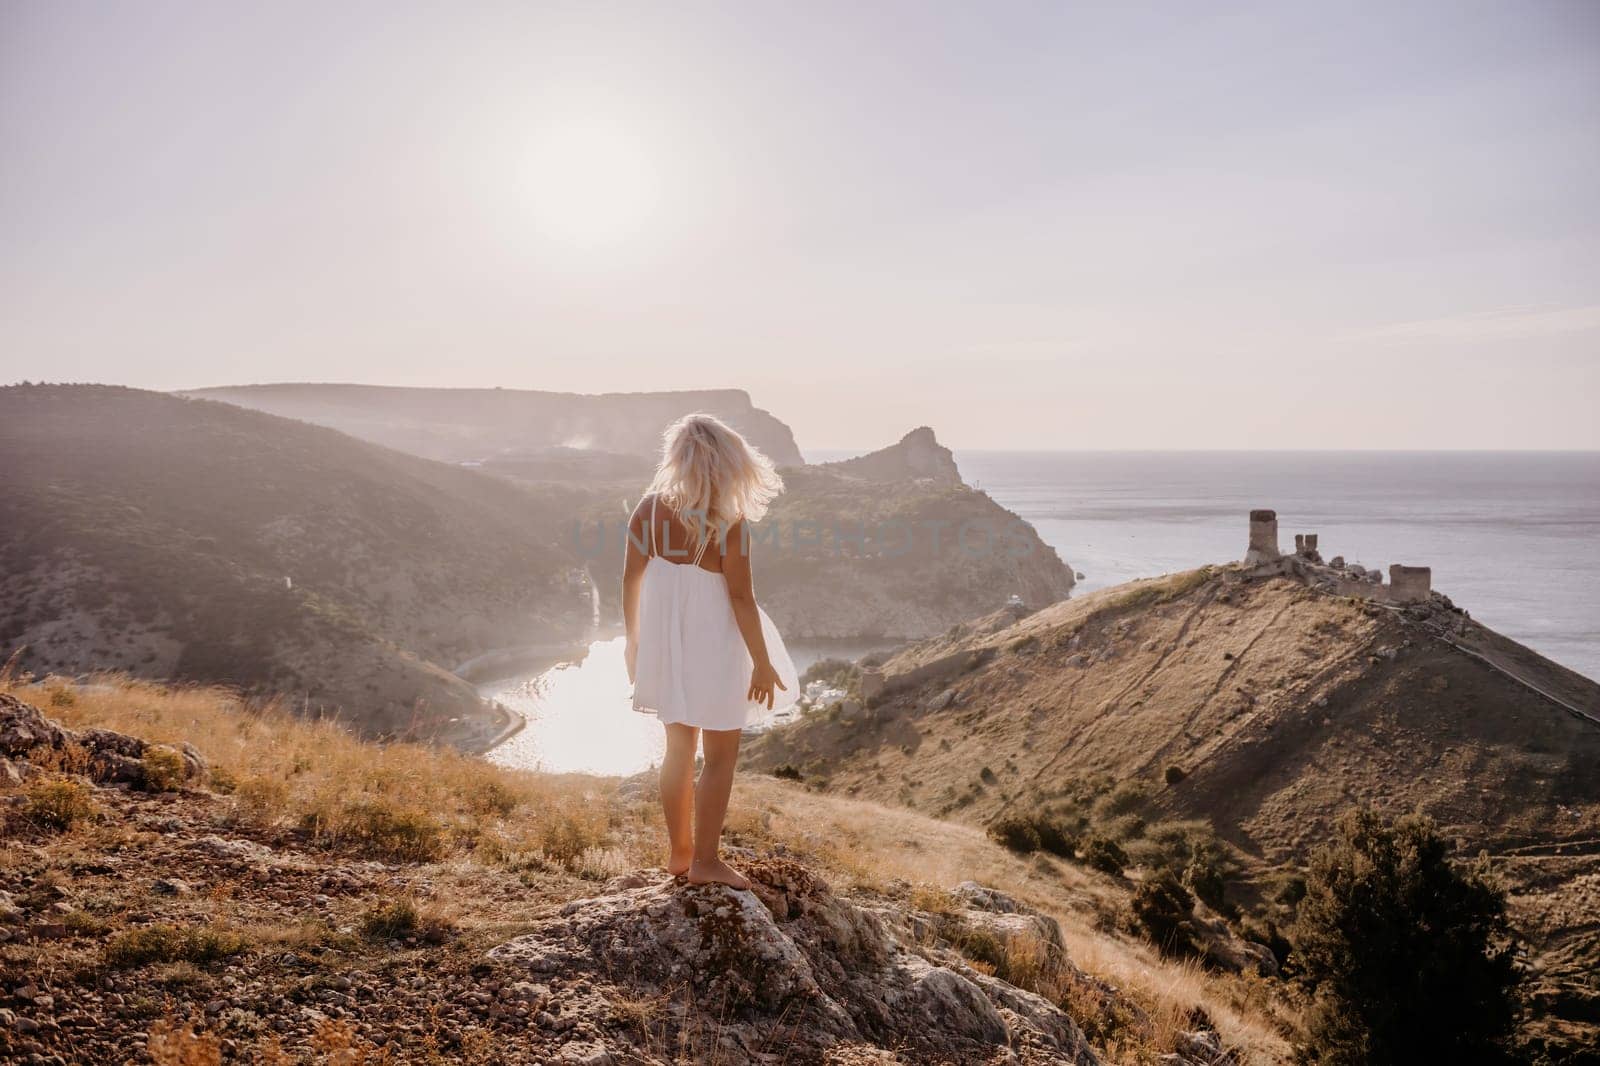 A woman stands on a hill overlooking a body of water. The sky is clear and the sun is shining brightly. The woman is enjoying the view and the peaceful atmosphere. by Matiunina